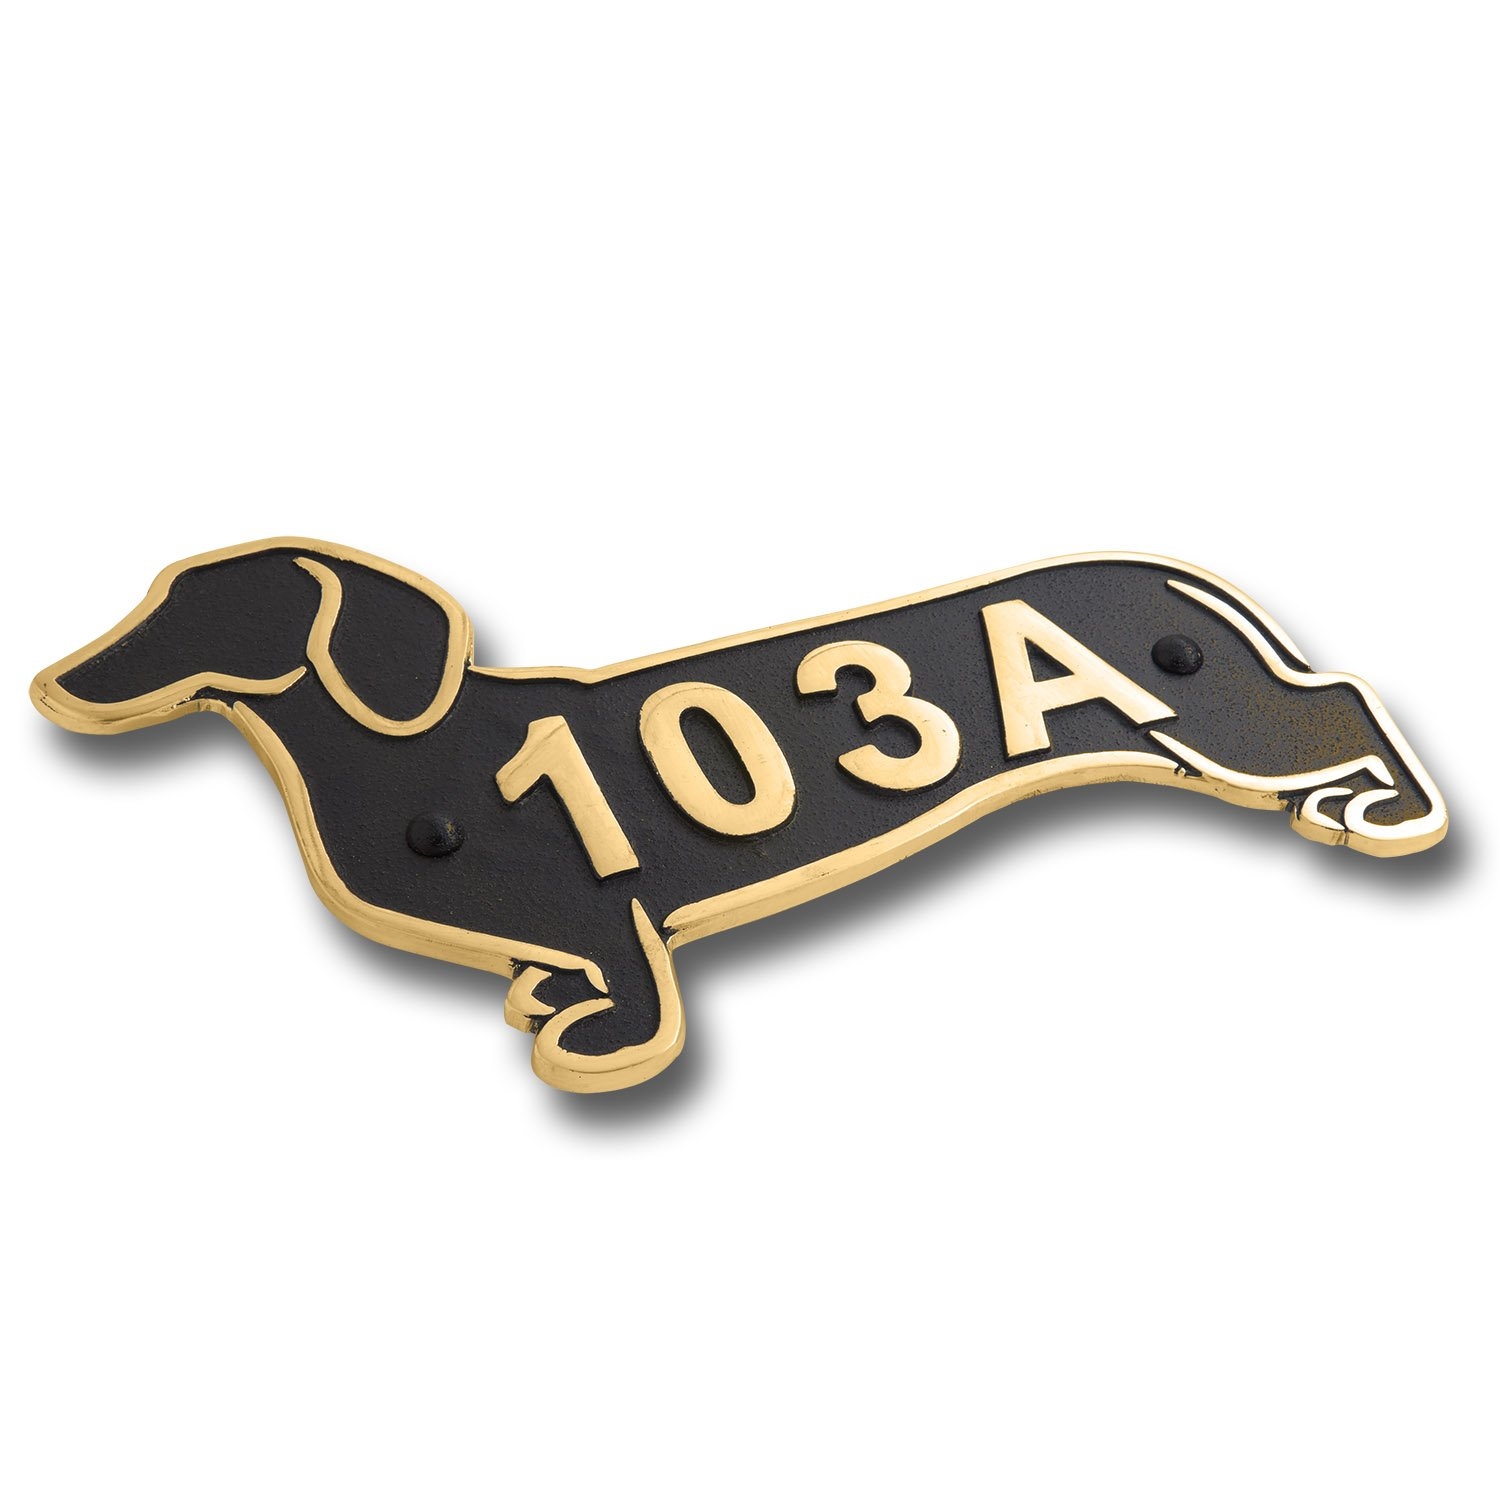 Dachshund Metal House Number Address Plaque. Sausage Dog Gift Idea For A Dachshund Owner. Yard Or Garden Dachshund Décor Makes A Great Gift For Him Or Her – Aluminium & Blue